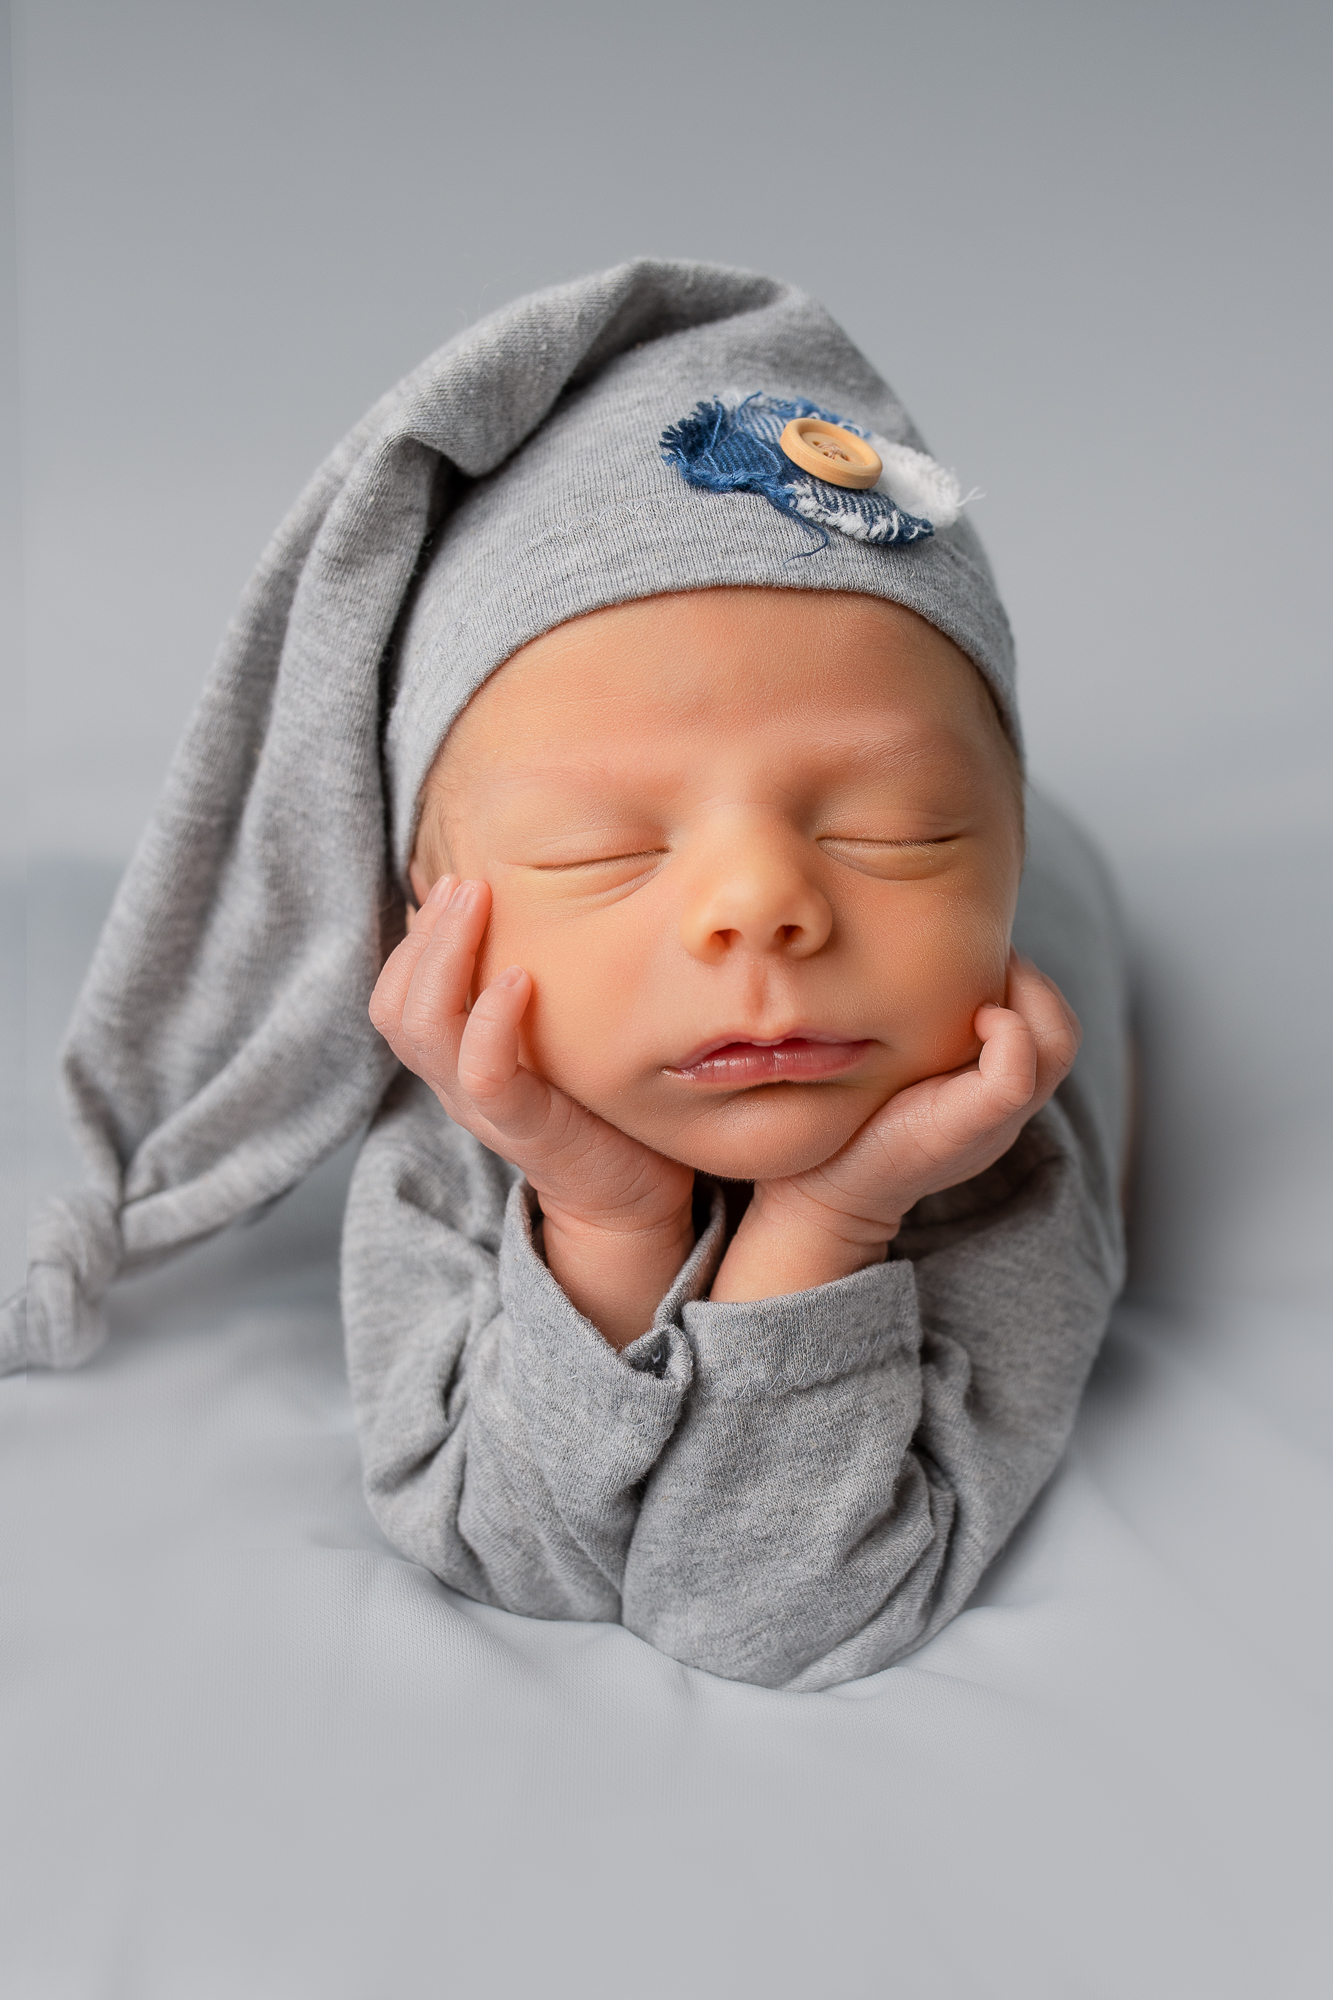 newborn baby boy froggy pose cute outfit gray